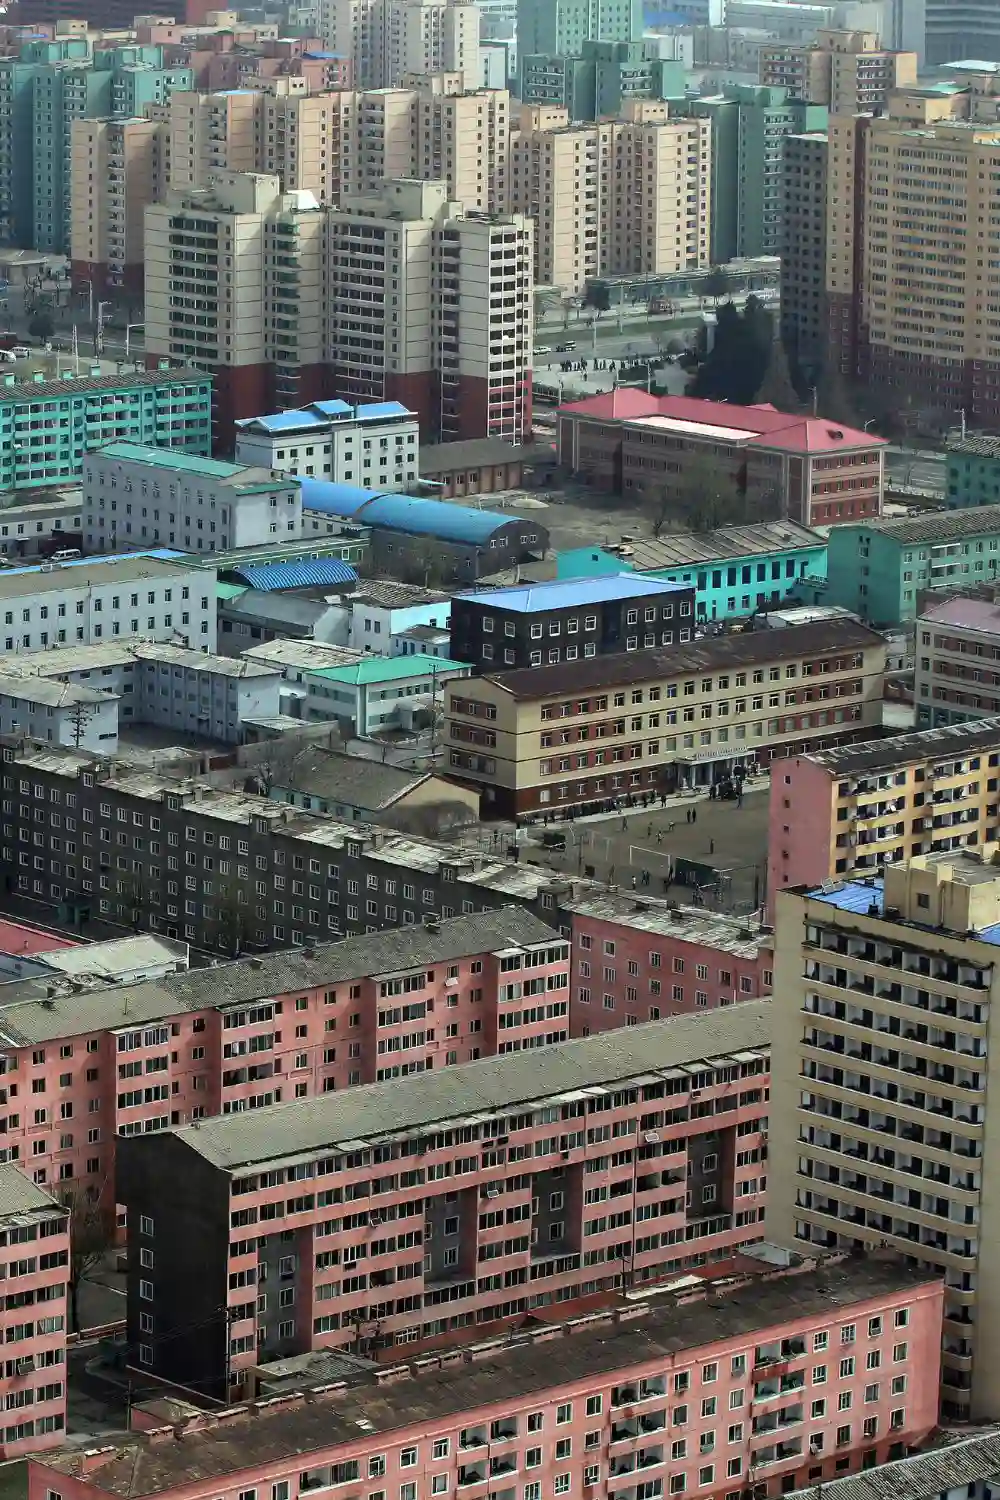 A view from North Korea